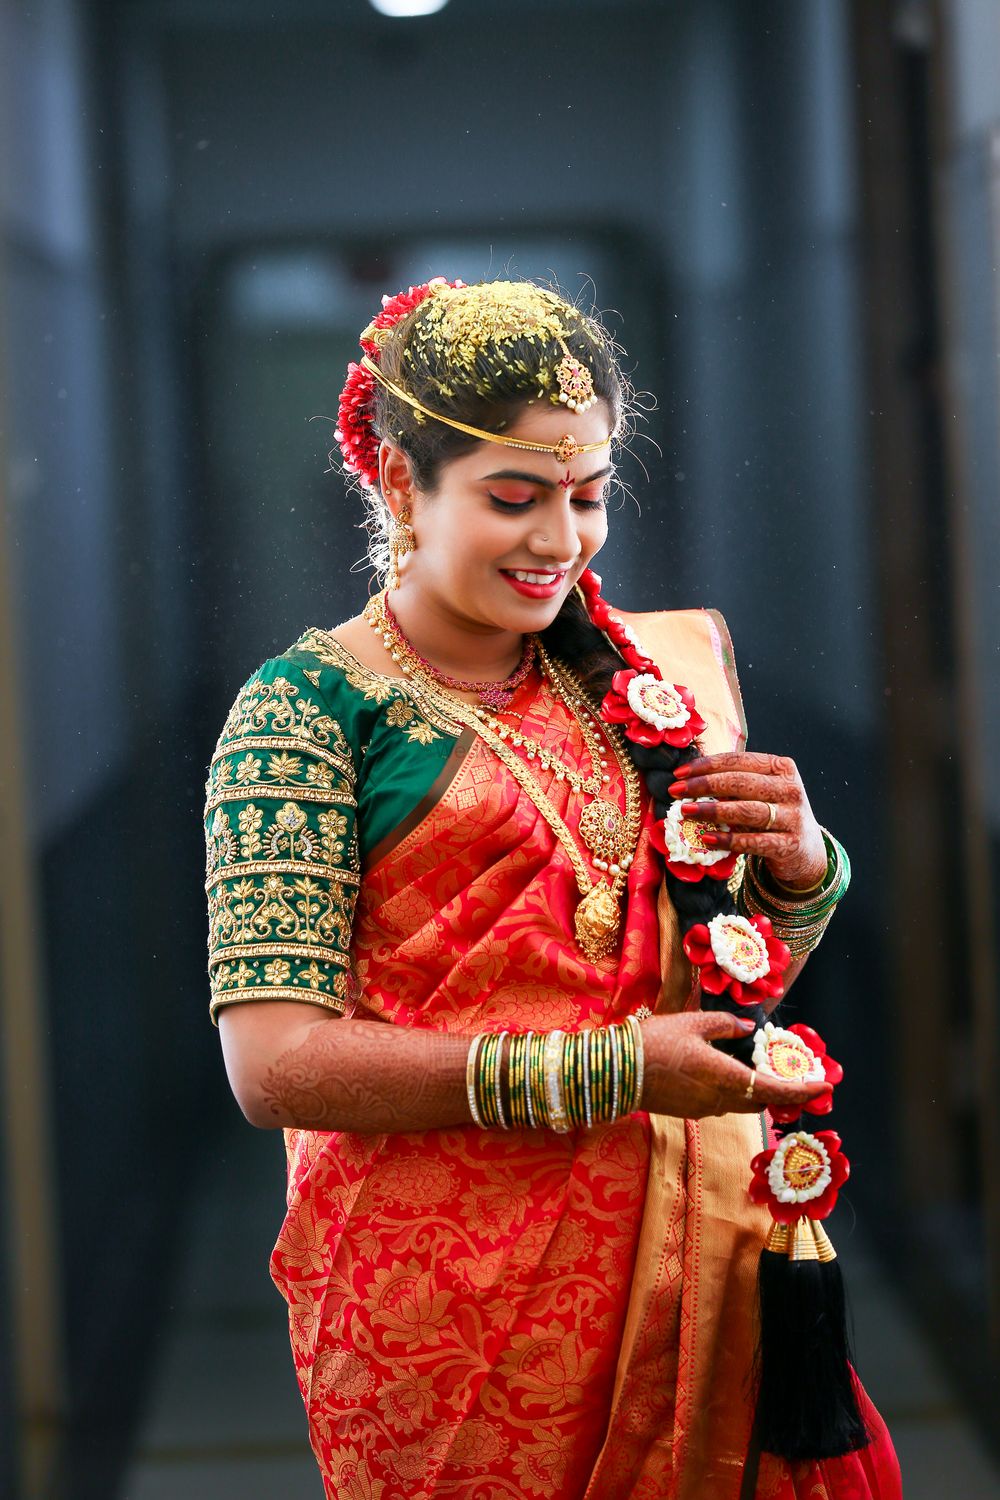 Photo From Spandana+Praneeth - By Vajra Photography Events